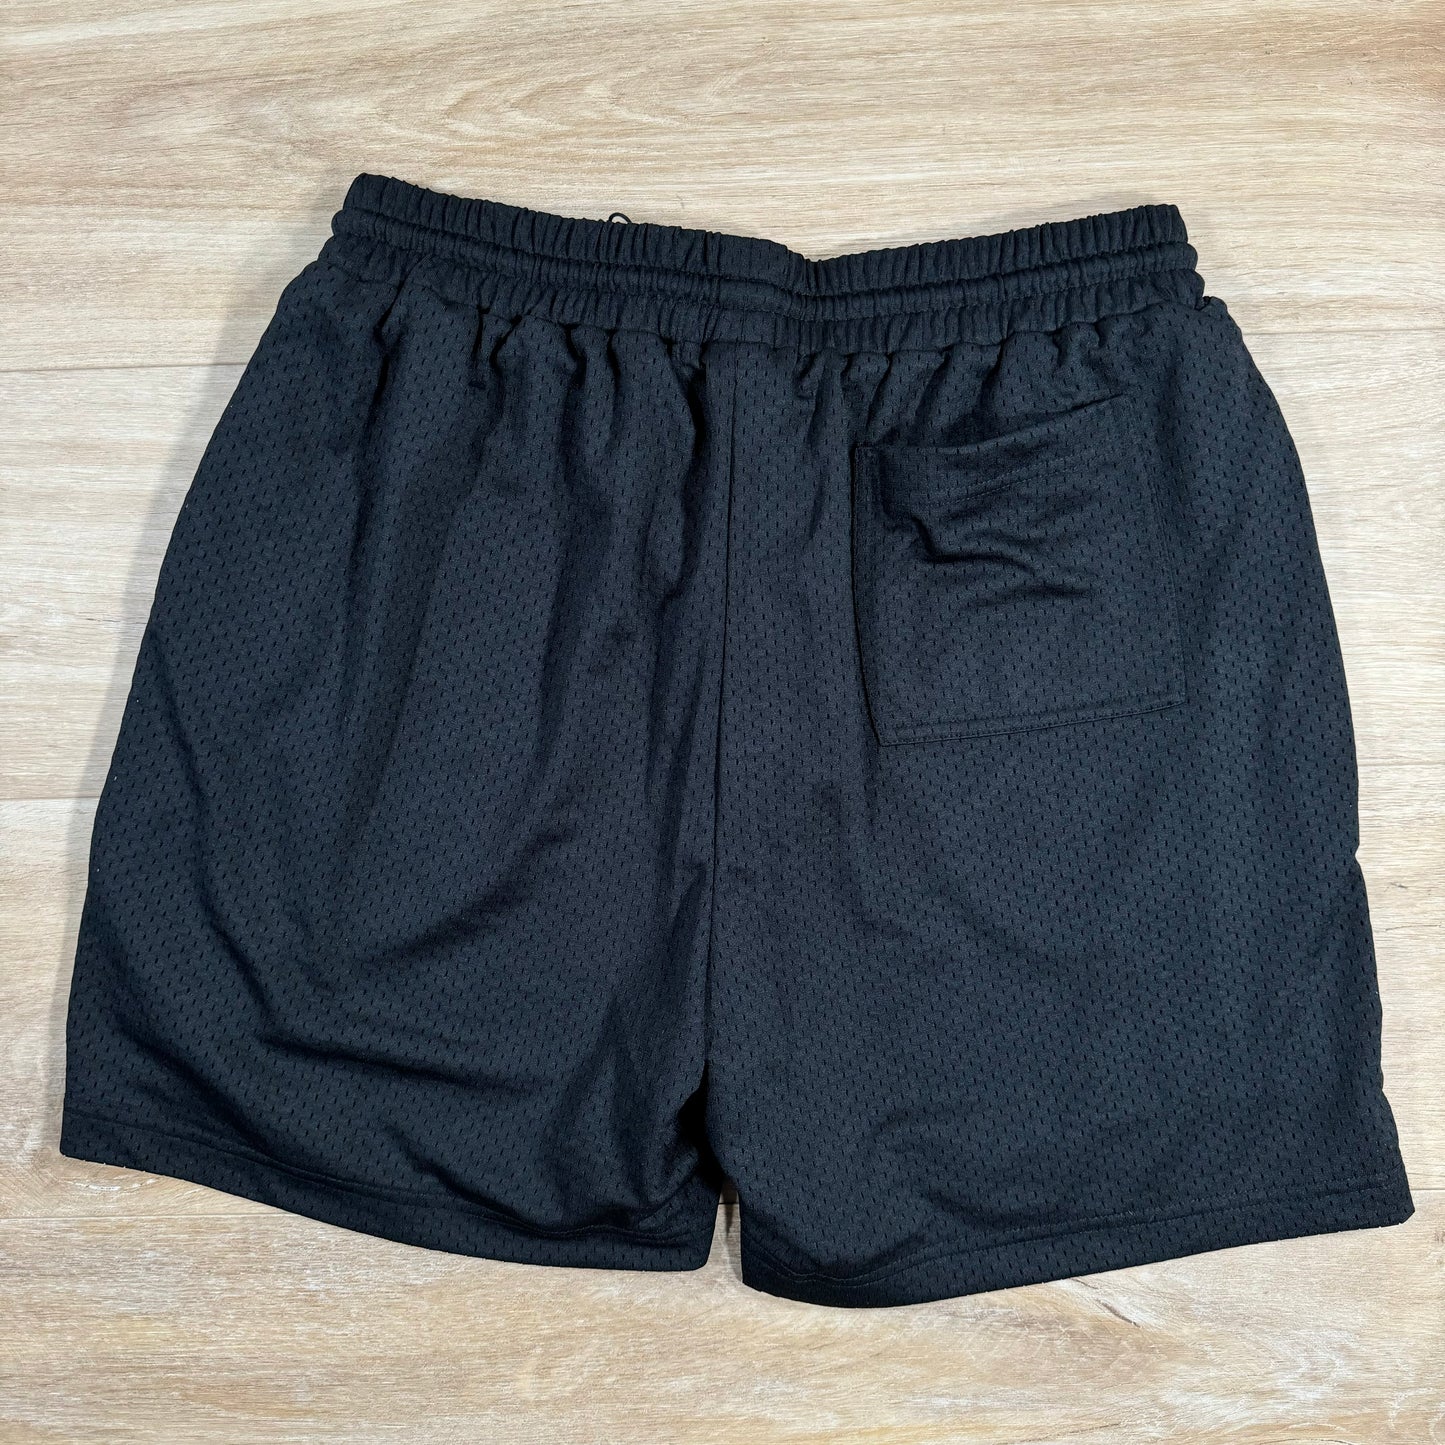 Represent Owners Club Mesh Shorts in Black